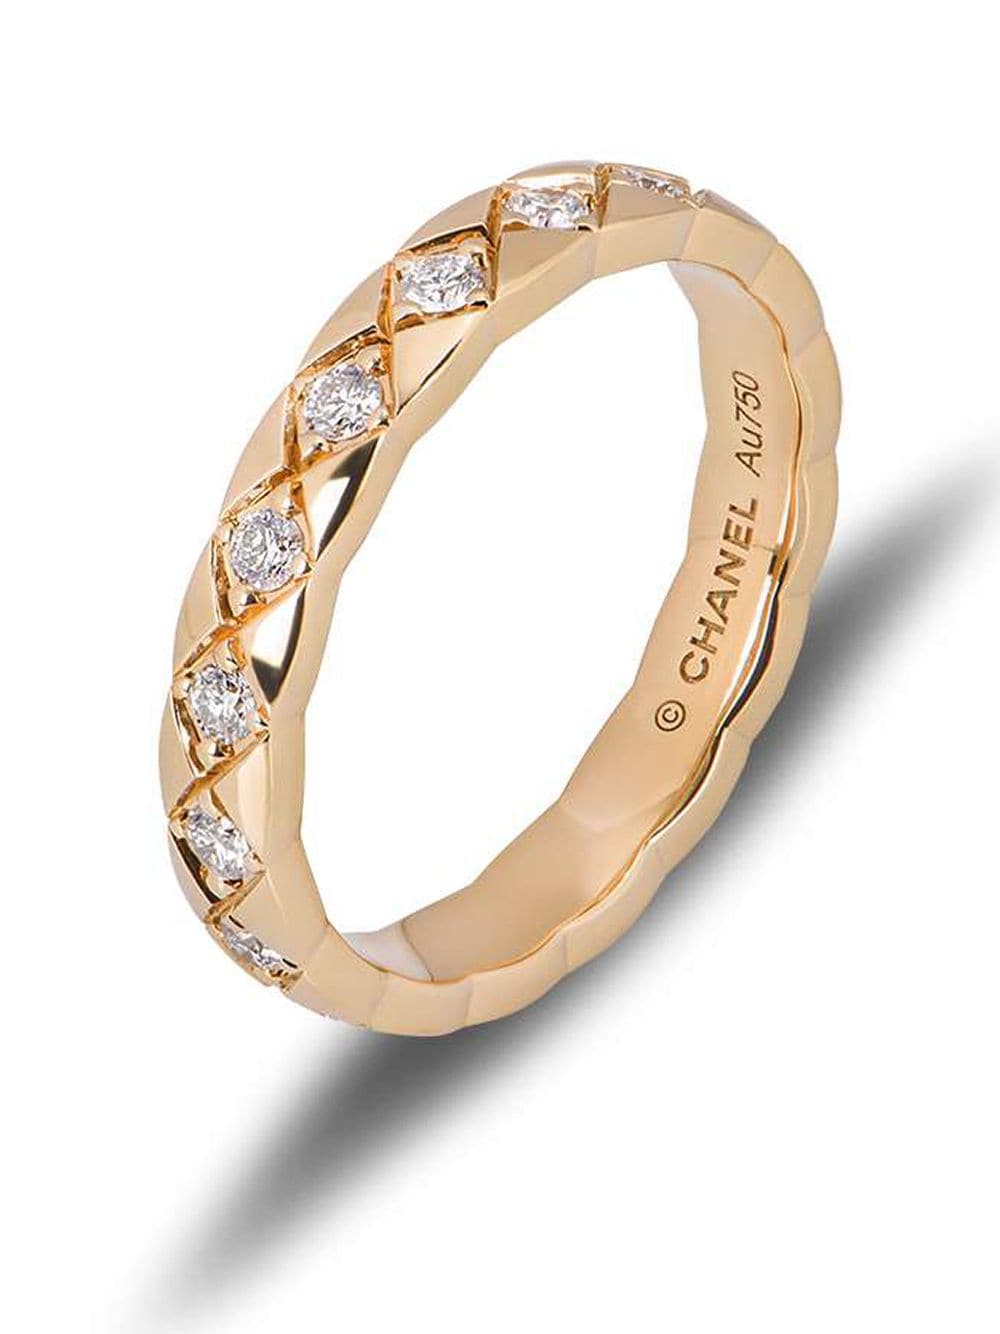 Chanel CoCo Crush Diamond and Gold Matelasse Ring Size 8.5